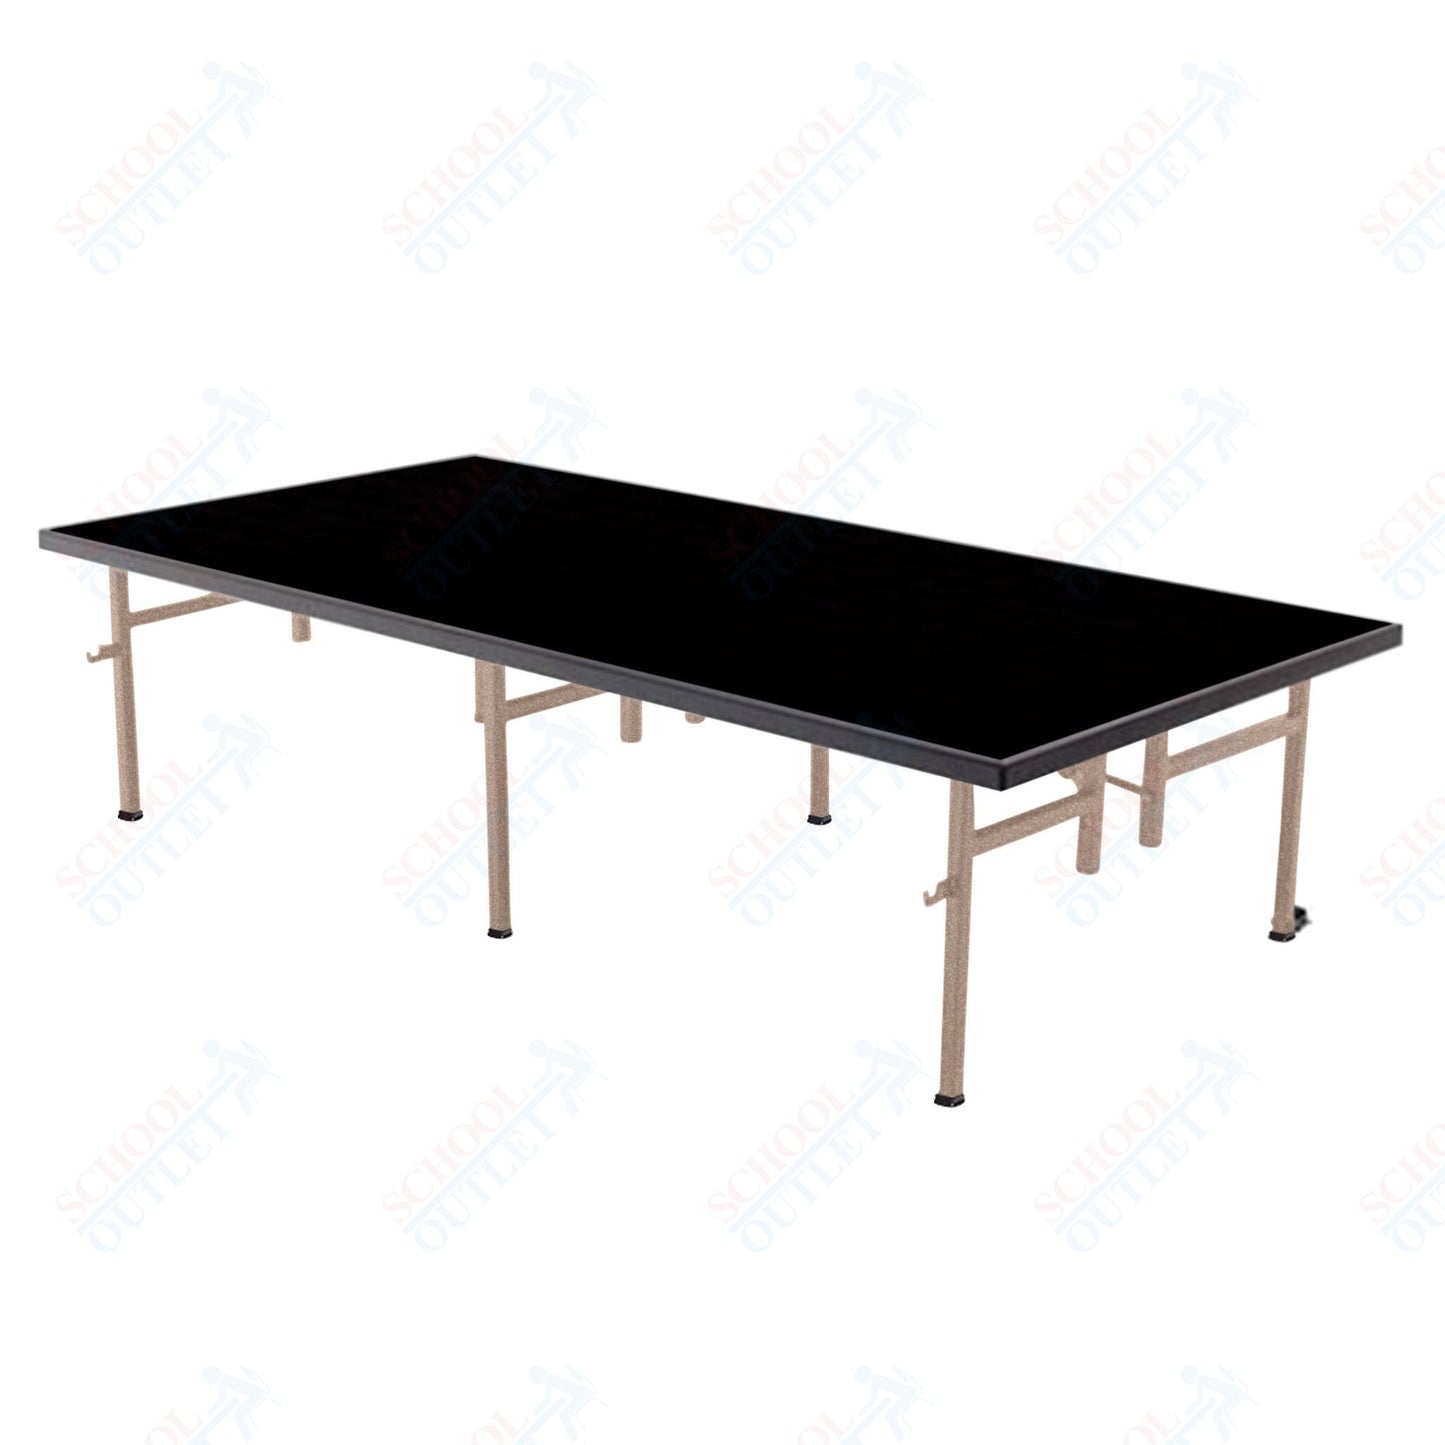 AmTab Fixed Height Stage - Polypropylene Top - 48"W x 72"L x 24"H (AmTab AMT - ST4624P) - SchoolOutlet